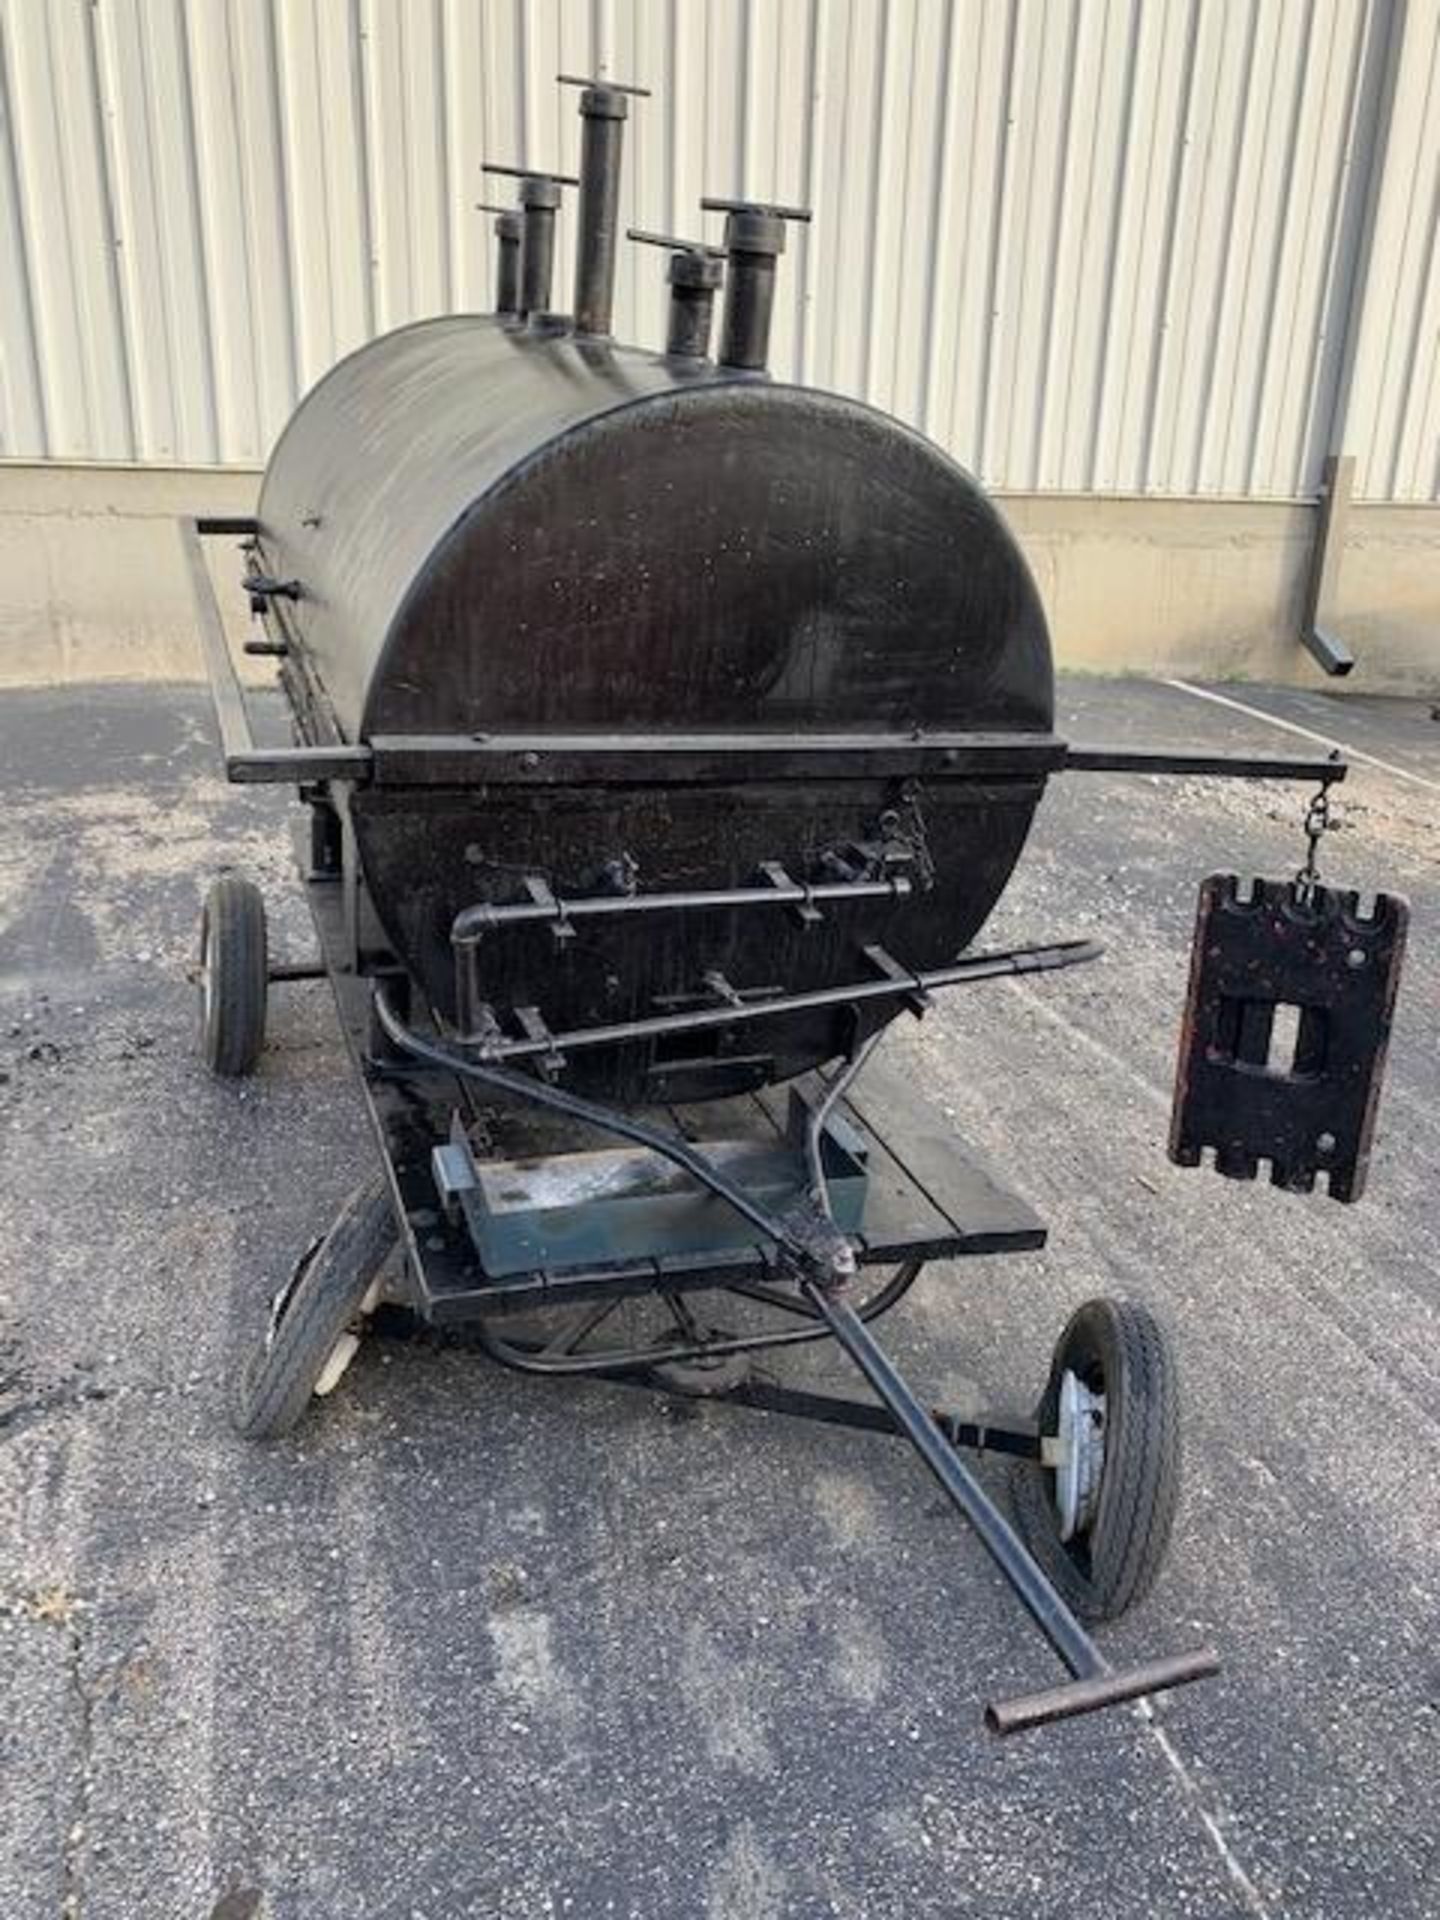 Custom made mobile BBQ grill, uses propane gas (has two flat tires) - Image 3 of 4